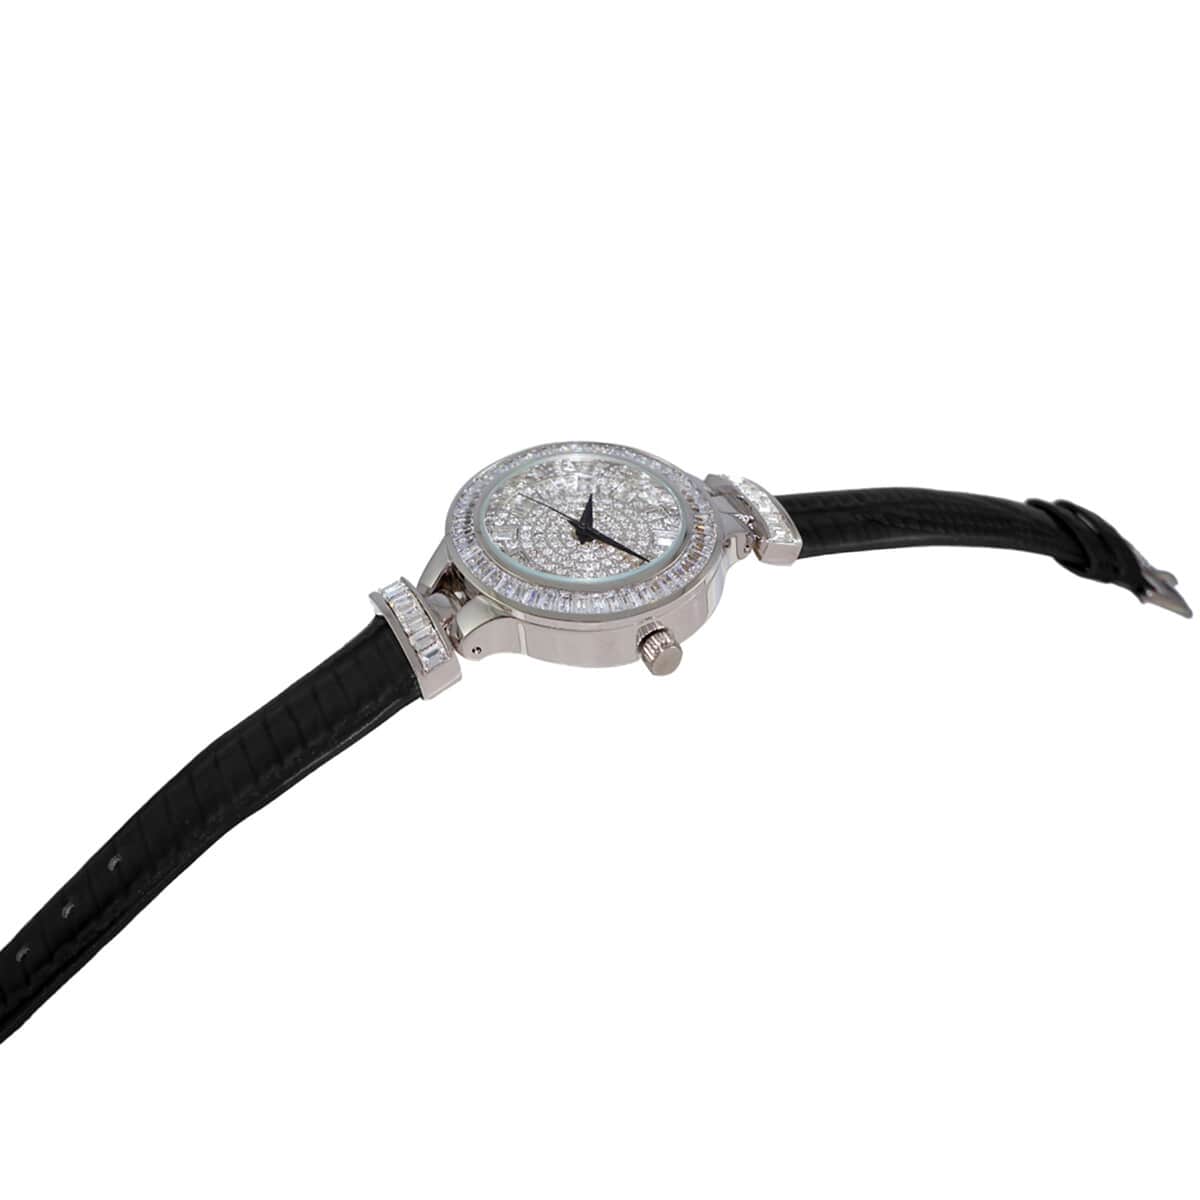 ADEE KAYE Austrian Crystal Japanese Movement Watch in Silvertone and Black Leather Strap (33 mm) image number 1